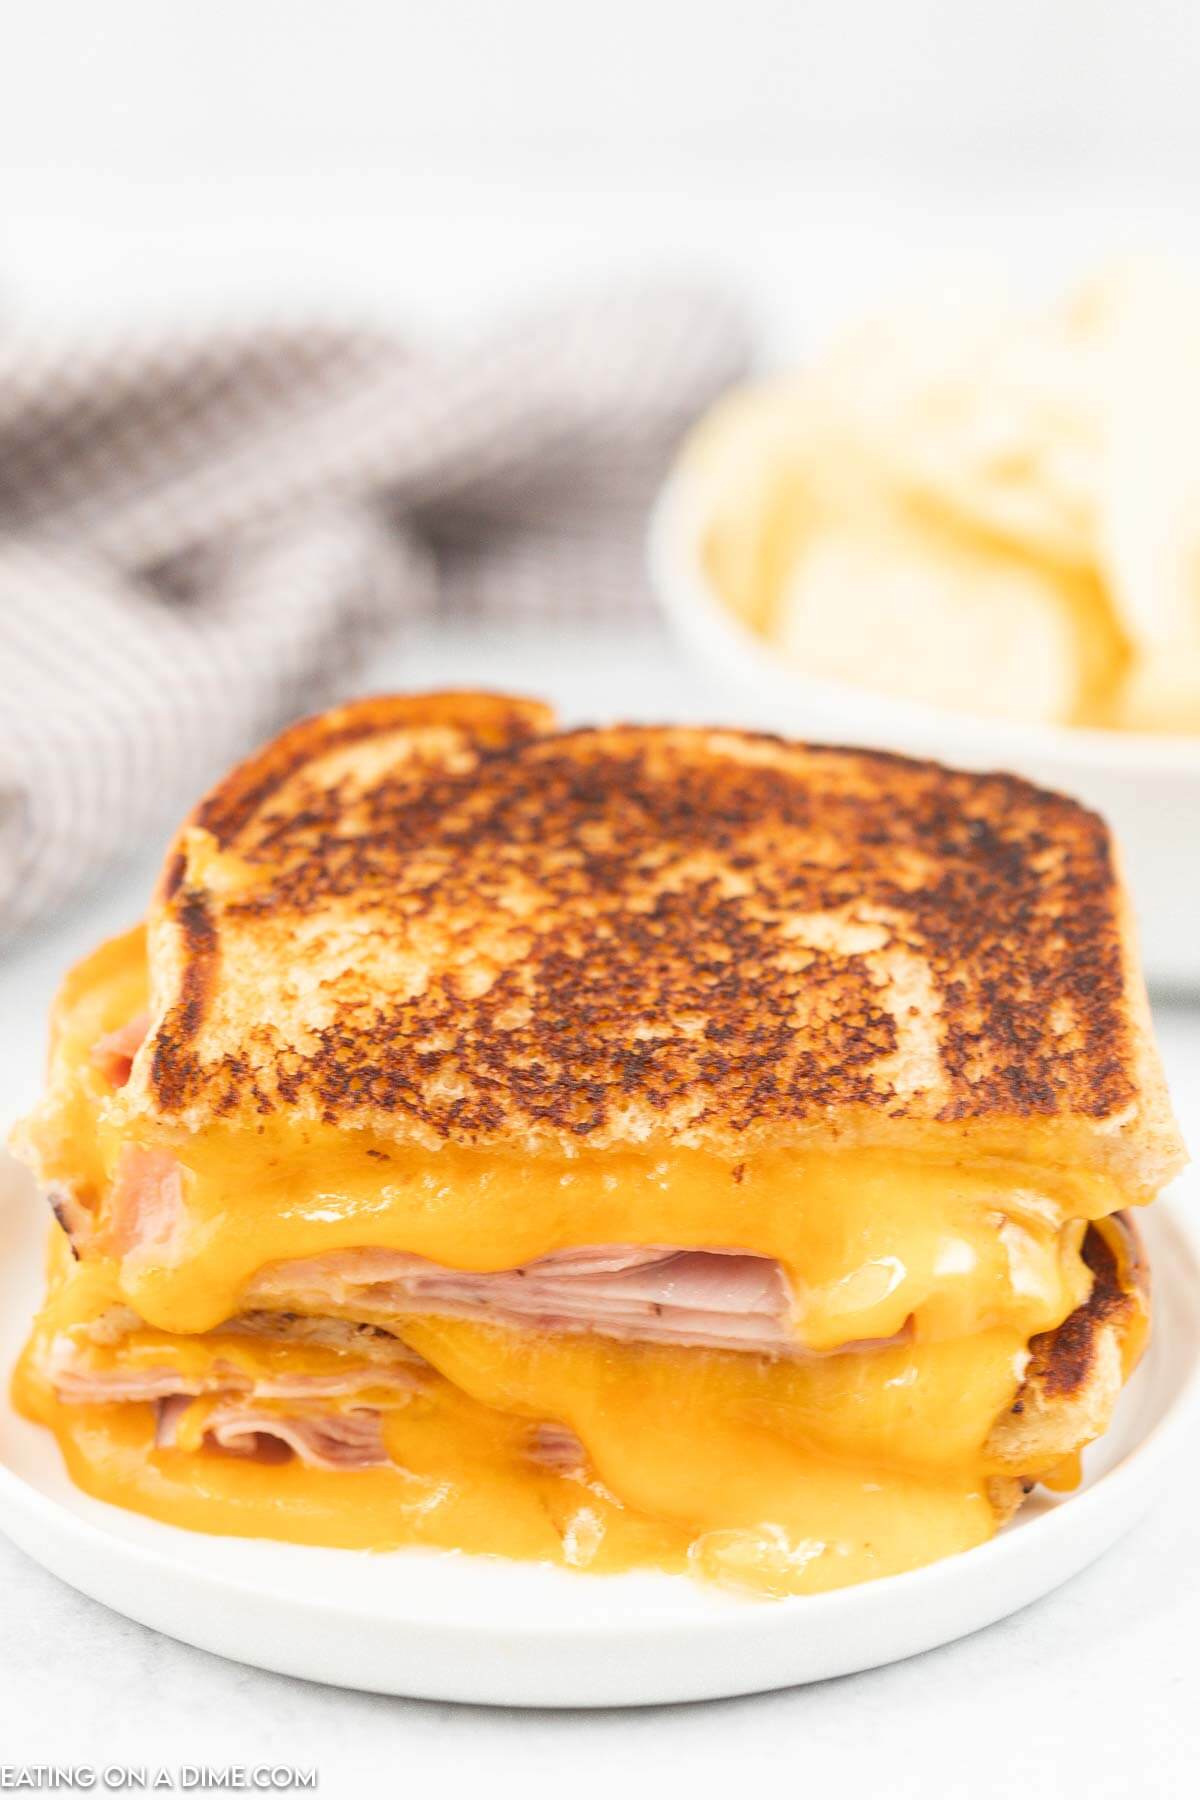 Grilled ham and cheese sandwich - Ready in 10 minutes